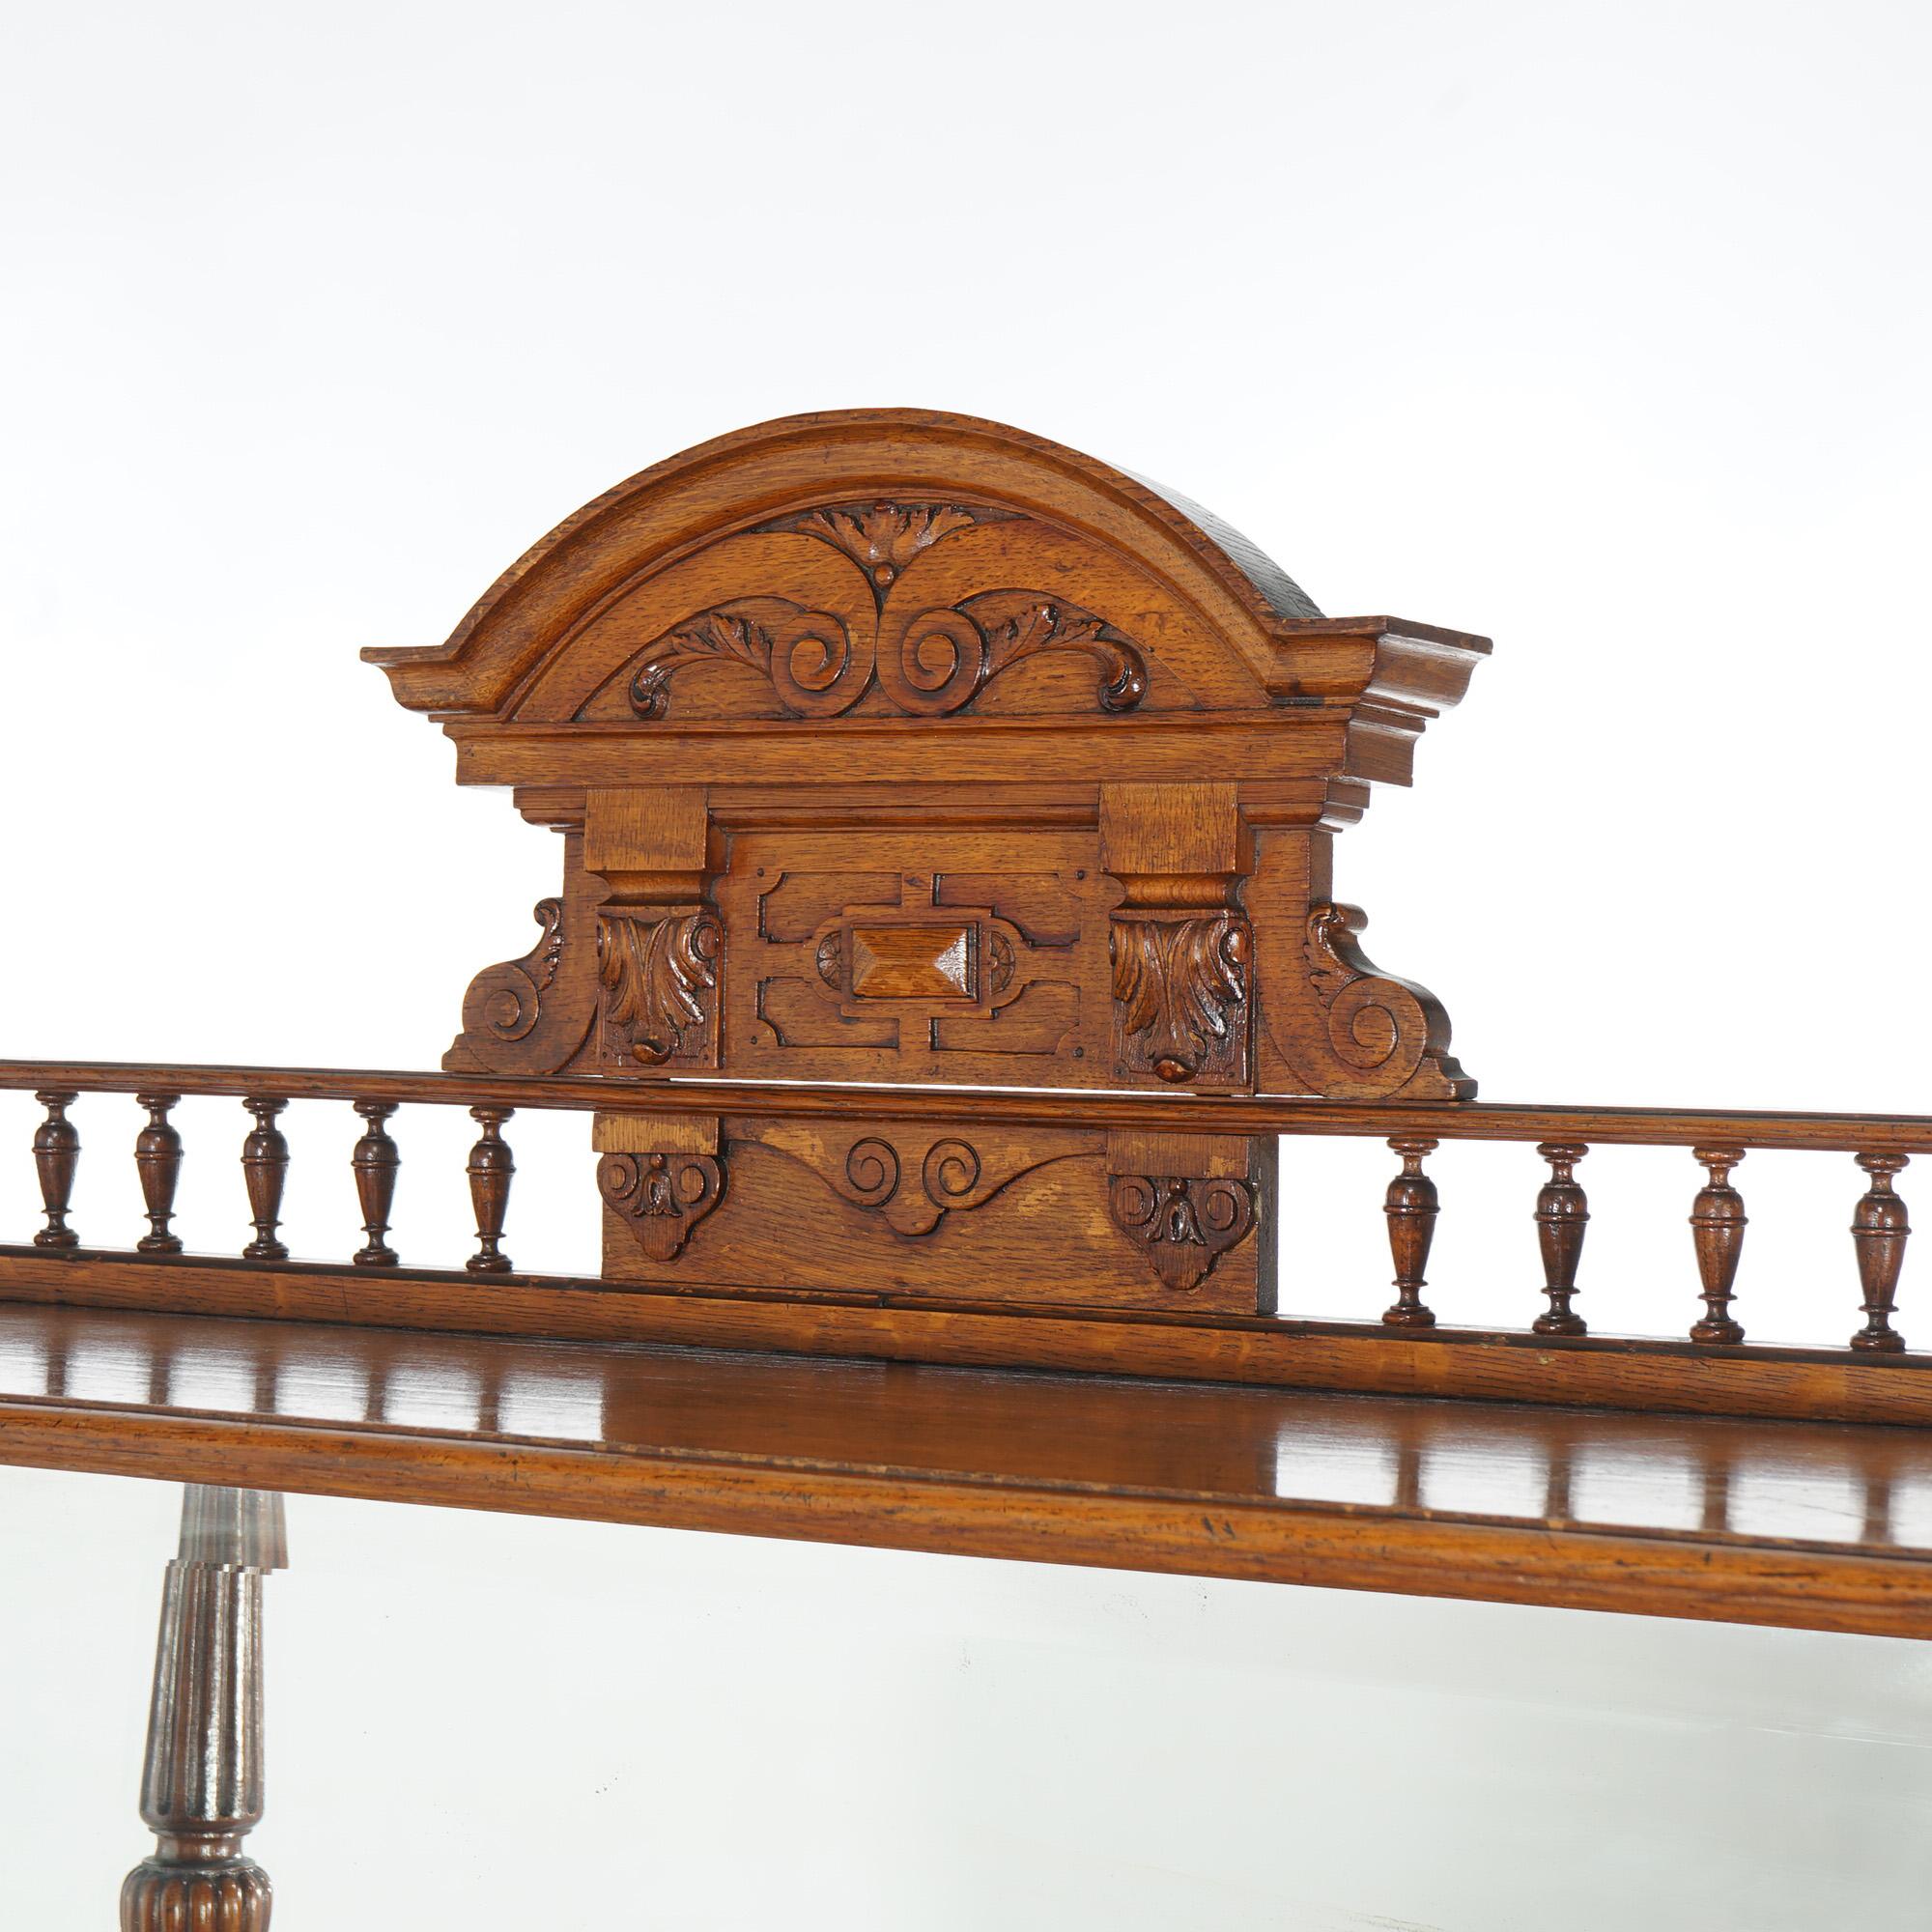 ***Ask About Reduced In-House Delivery Rates - Reliable Professional Service & Fully Insured***
Antique Oak Marble Top Server with Mirrored Back Splash, Carved Crest & Spindled Rail Raised on Turned Columns with Lower Shelf and Bun Feet, Original